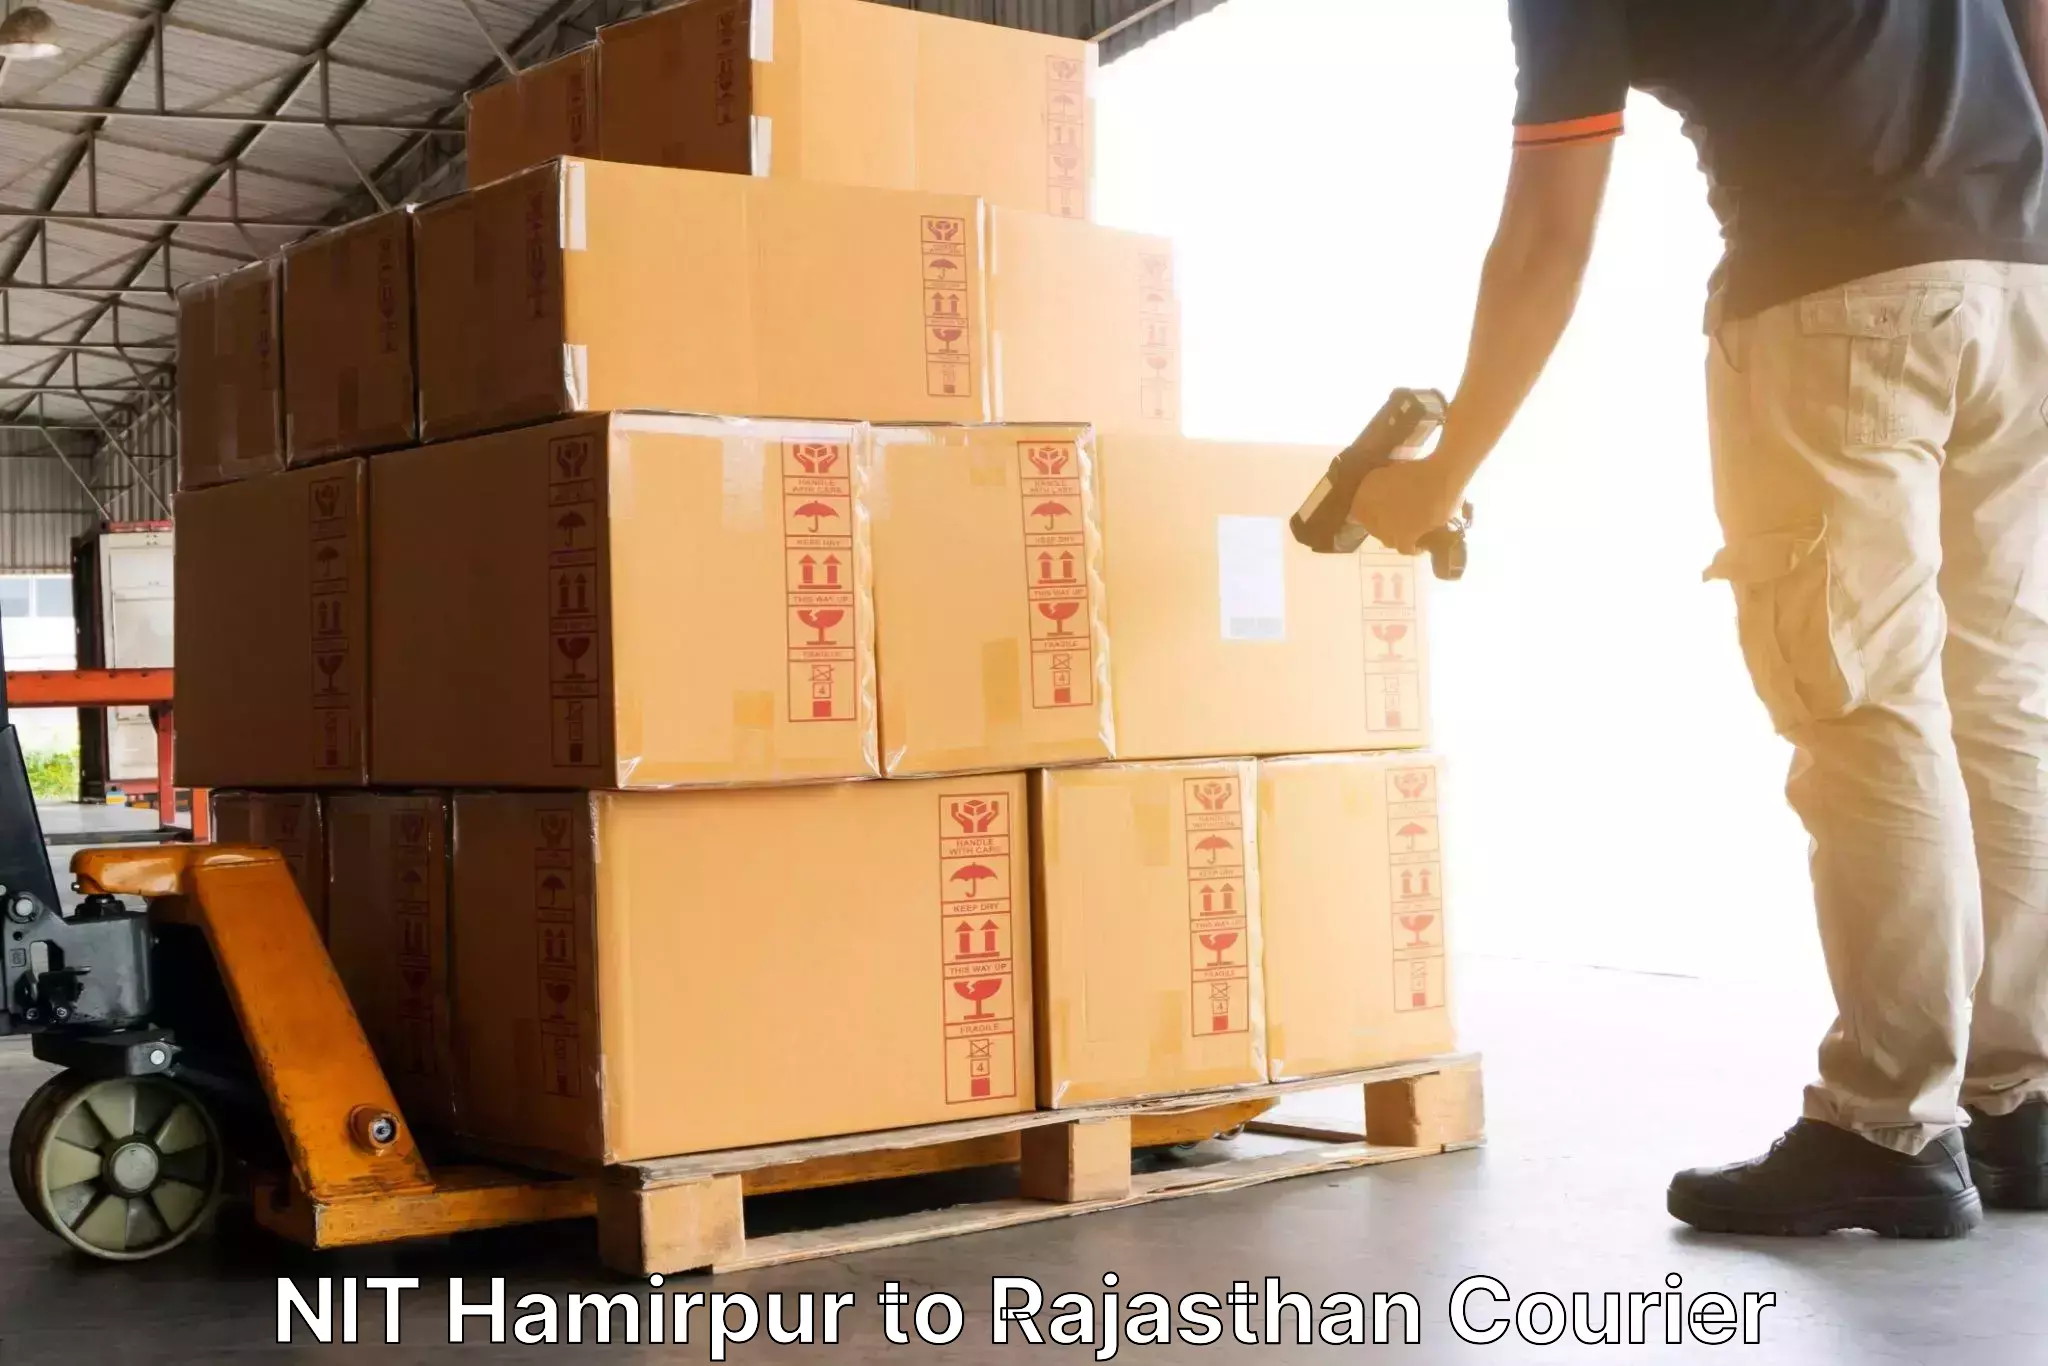 Nationwide shipping services NIT Hamirpur to Jaipur